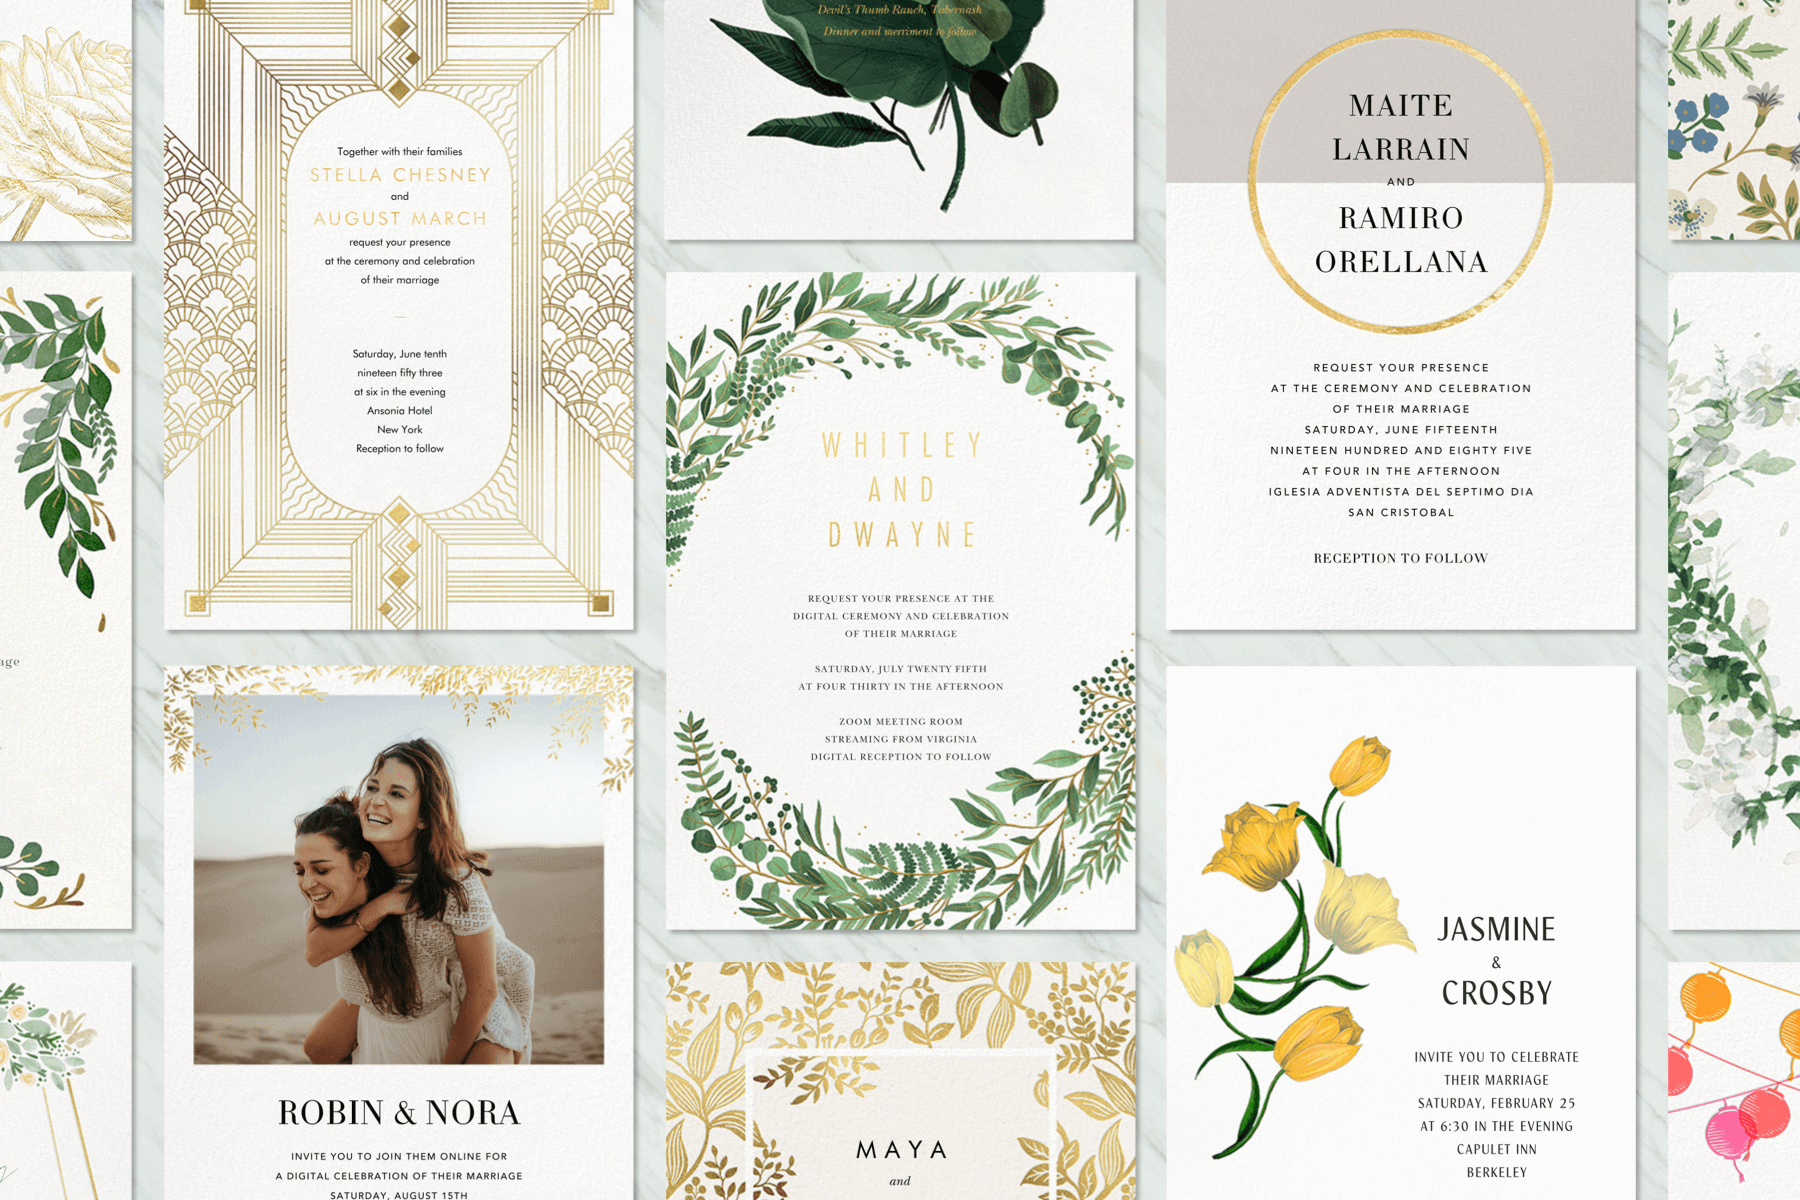 Addressing wedding invitations: the survival guide